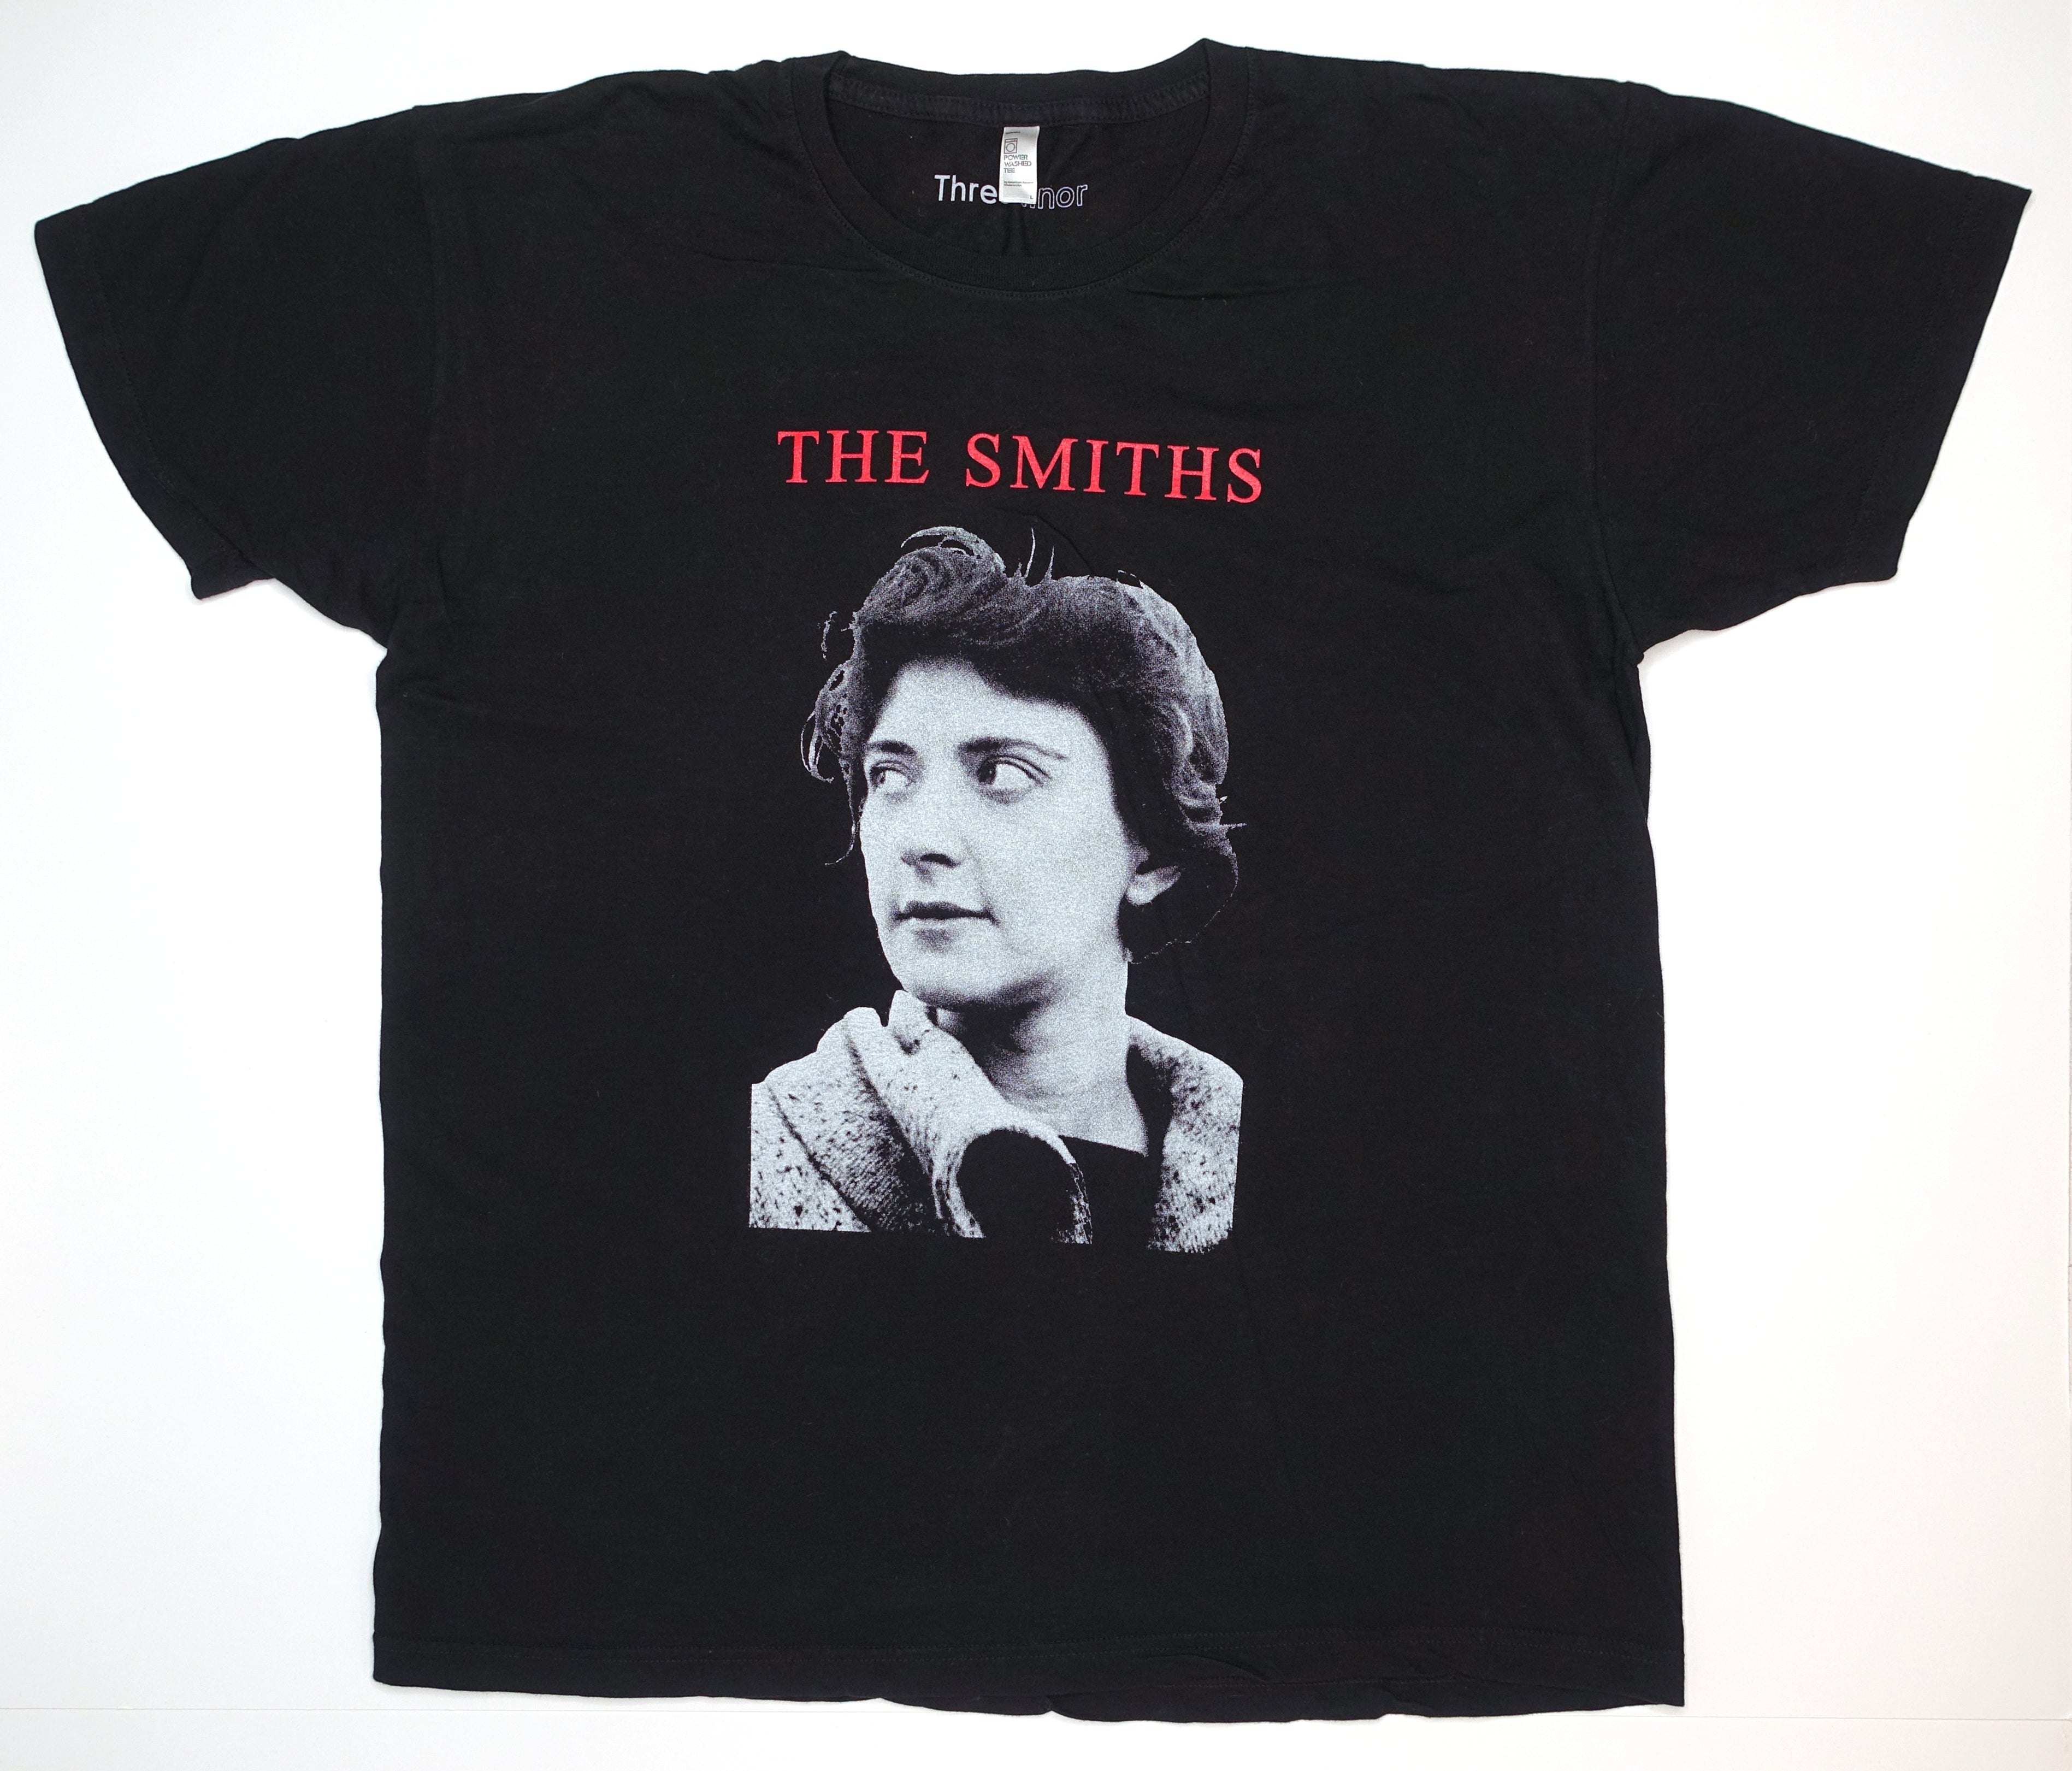 the Smiths - Girlfriend In A Coma Black Shirt (Bootleg by Me) Size Large